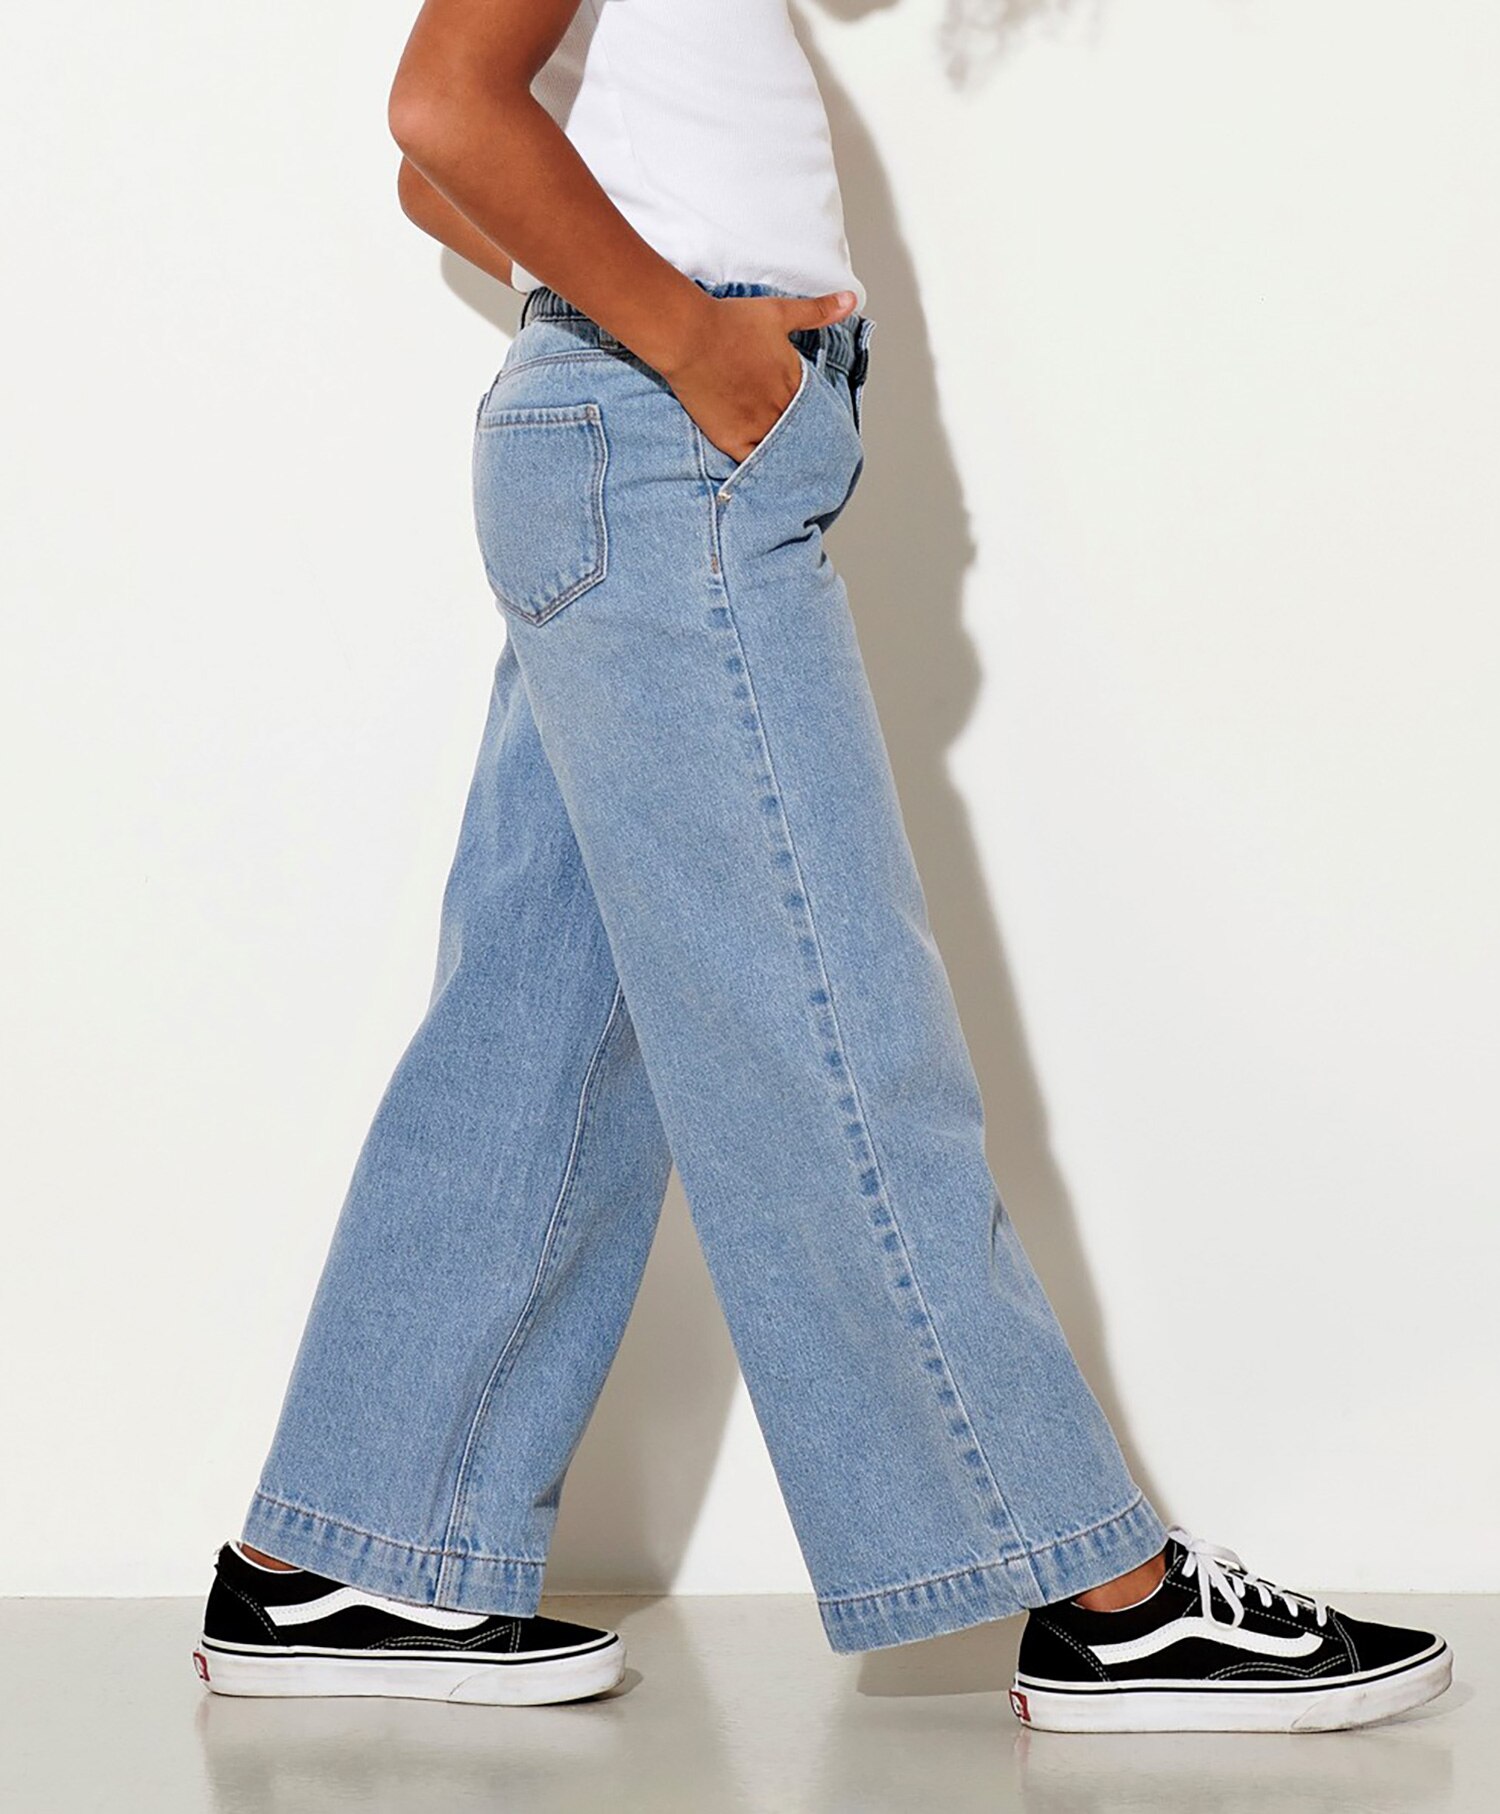 Only Kids Comet Wide jeans